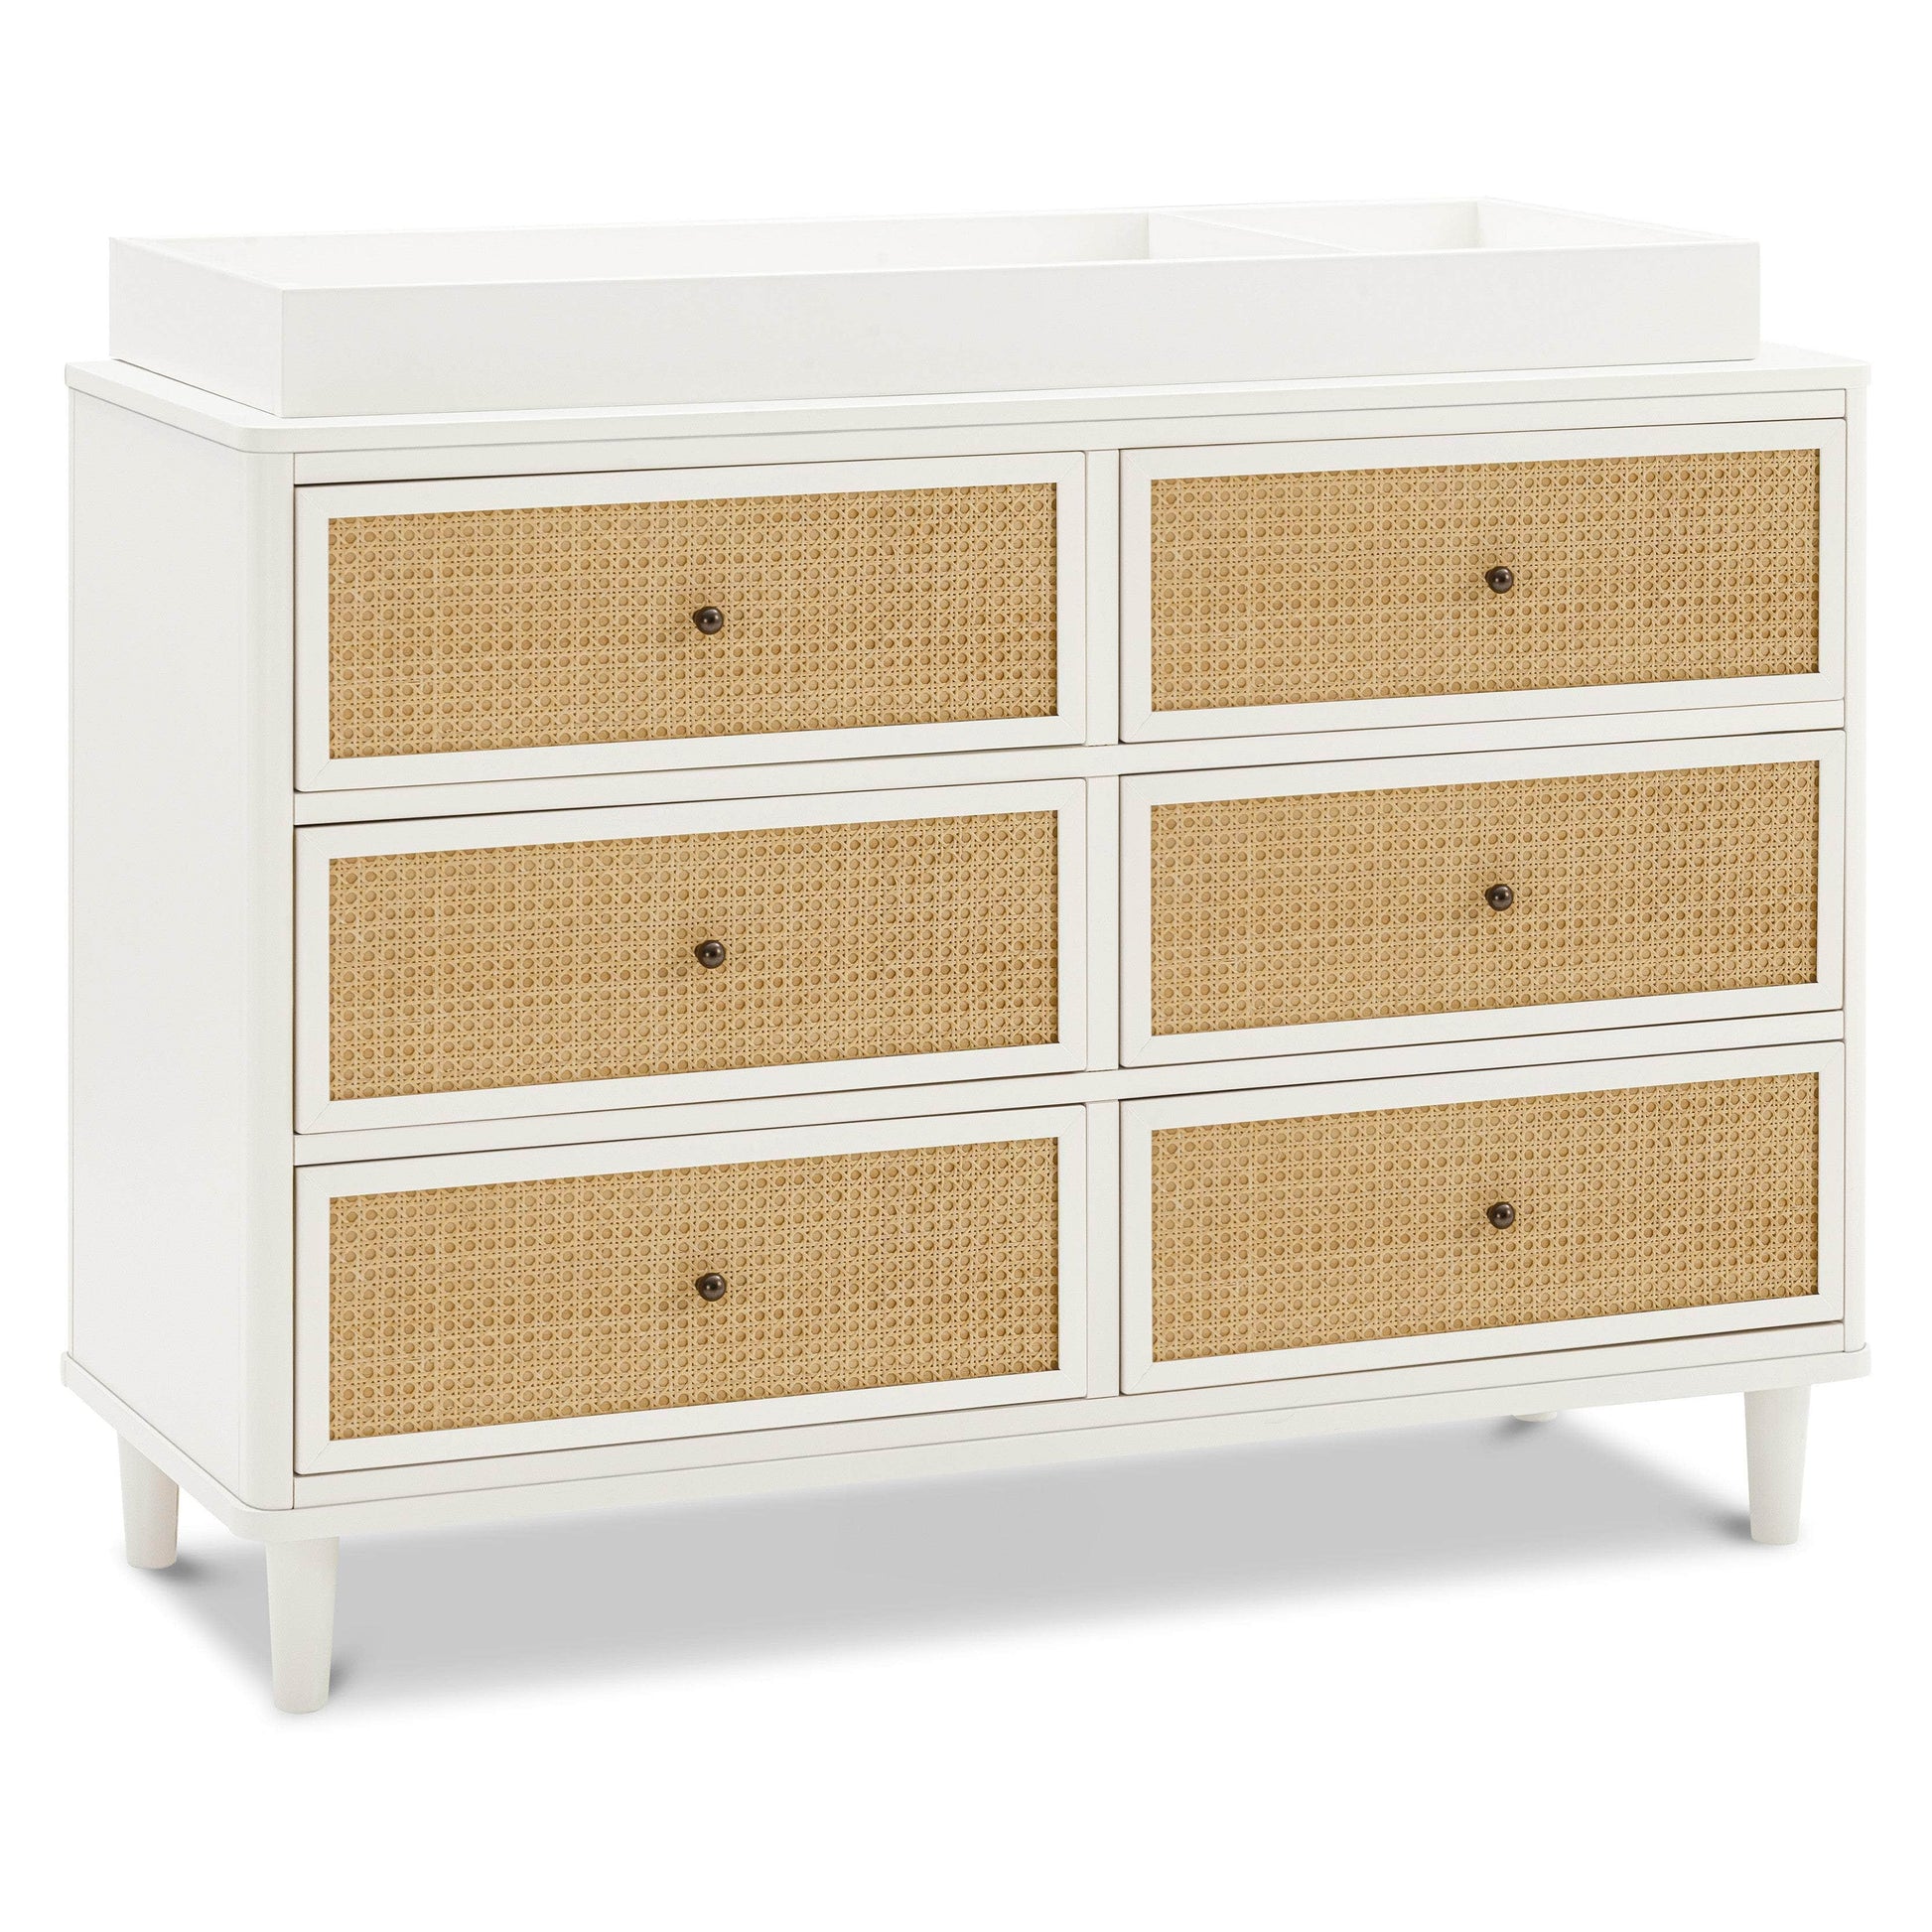 M23716RWHC,Marin with Cane 6 Drawer Assembled Dresser in Warm White and Honey Cane